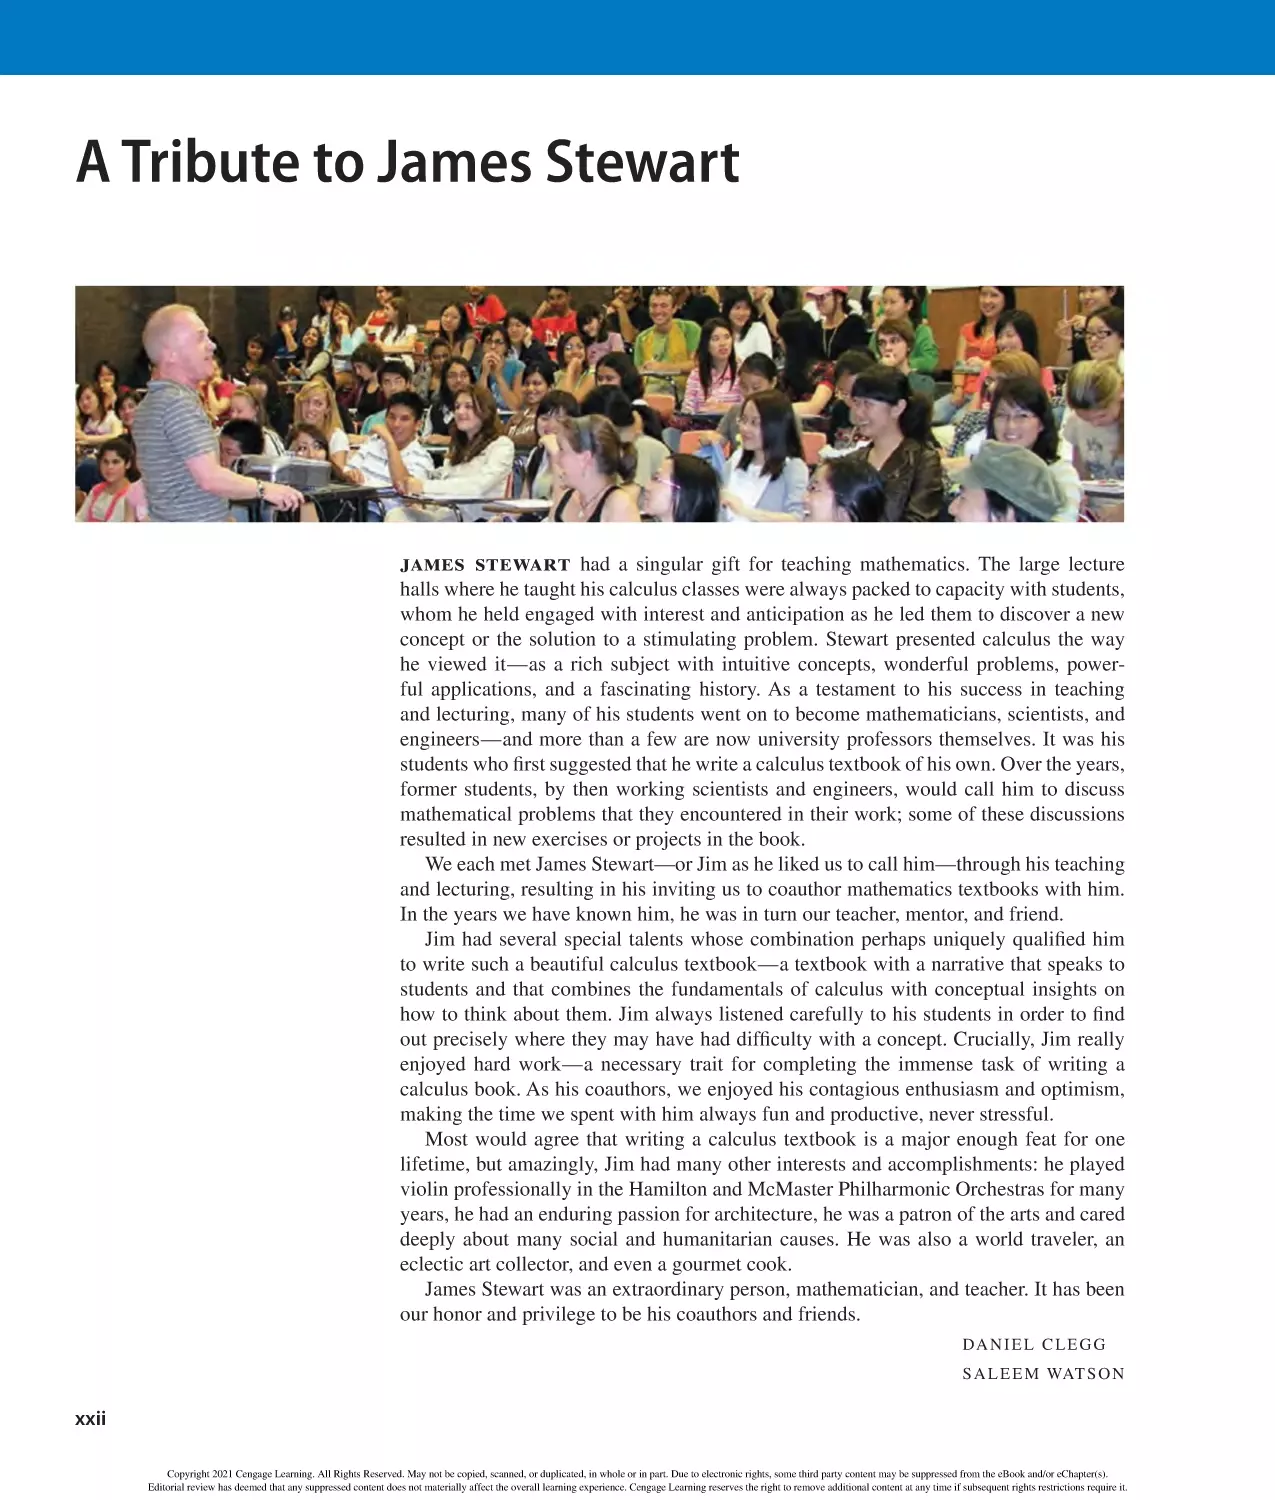 A Tribute to James Stewart